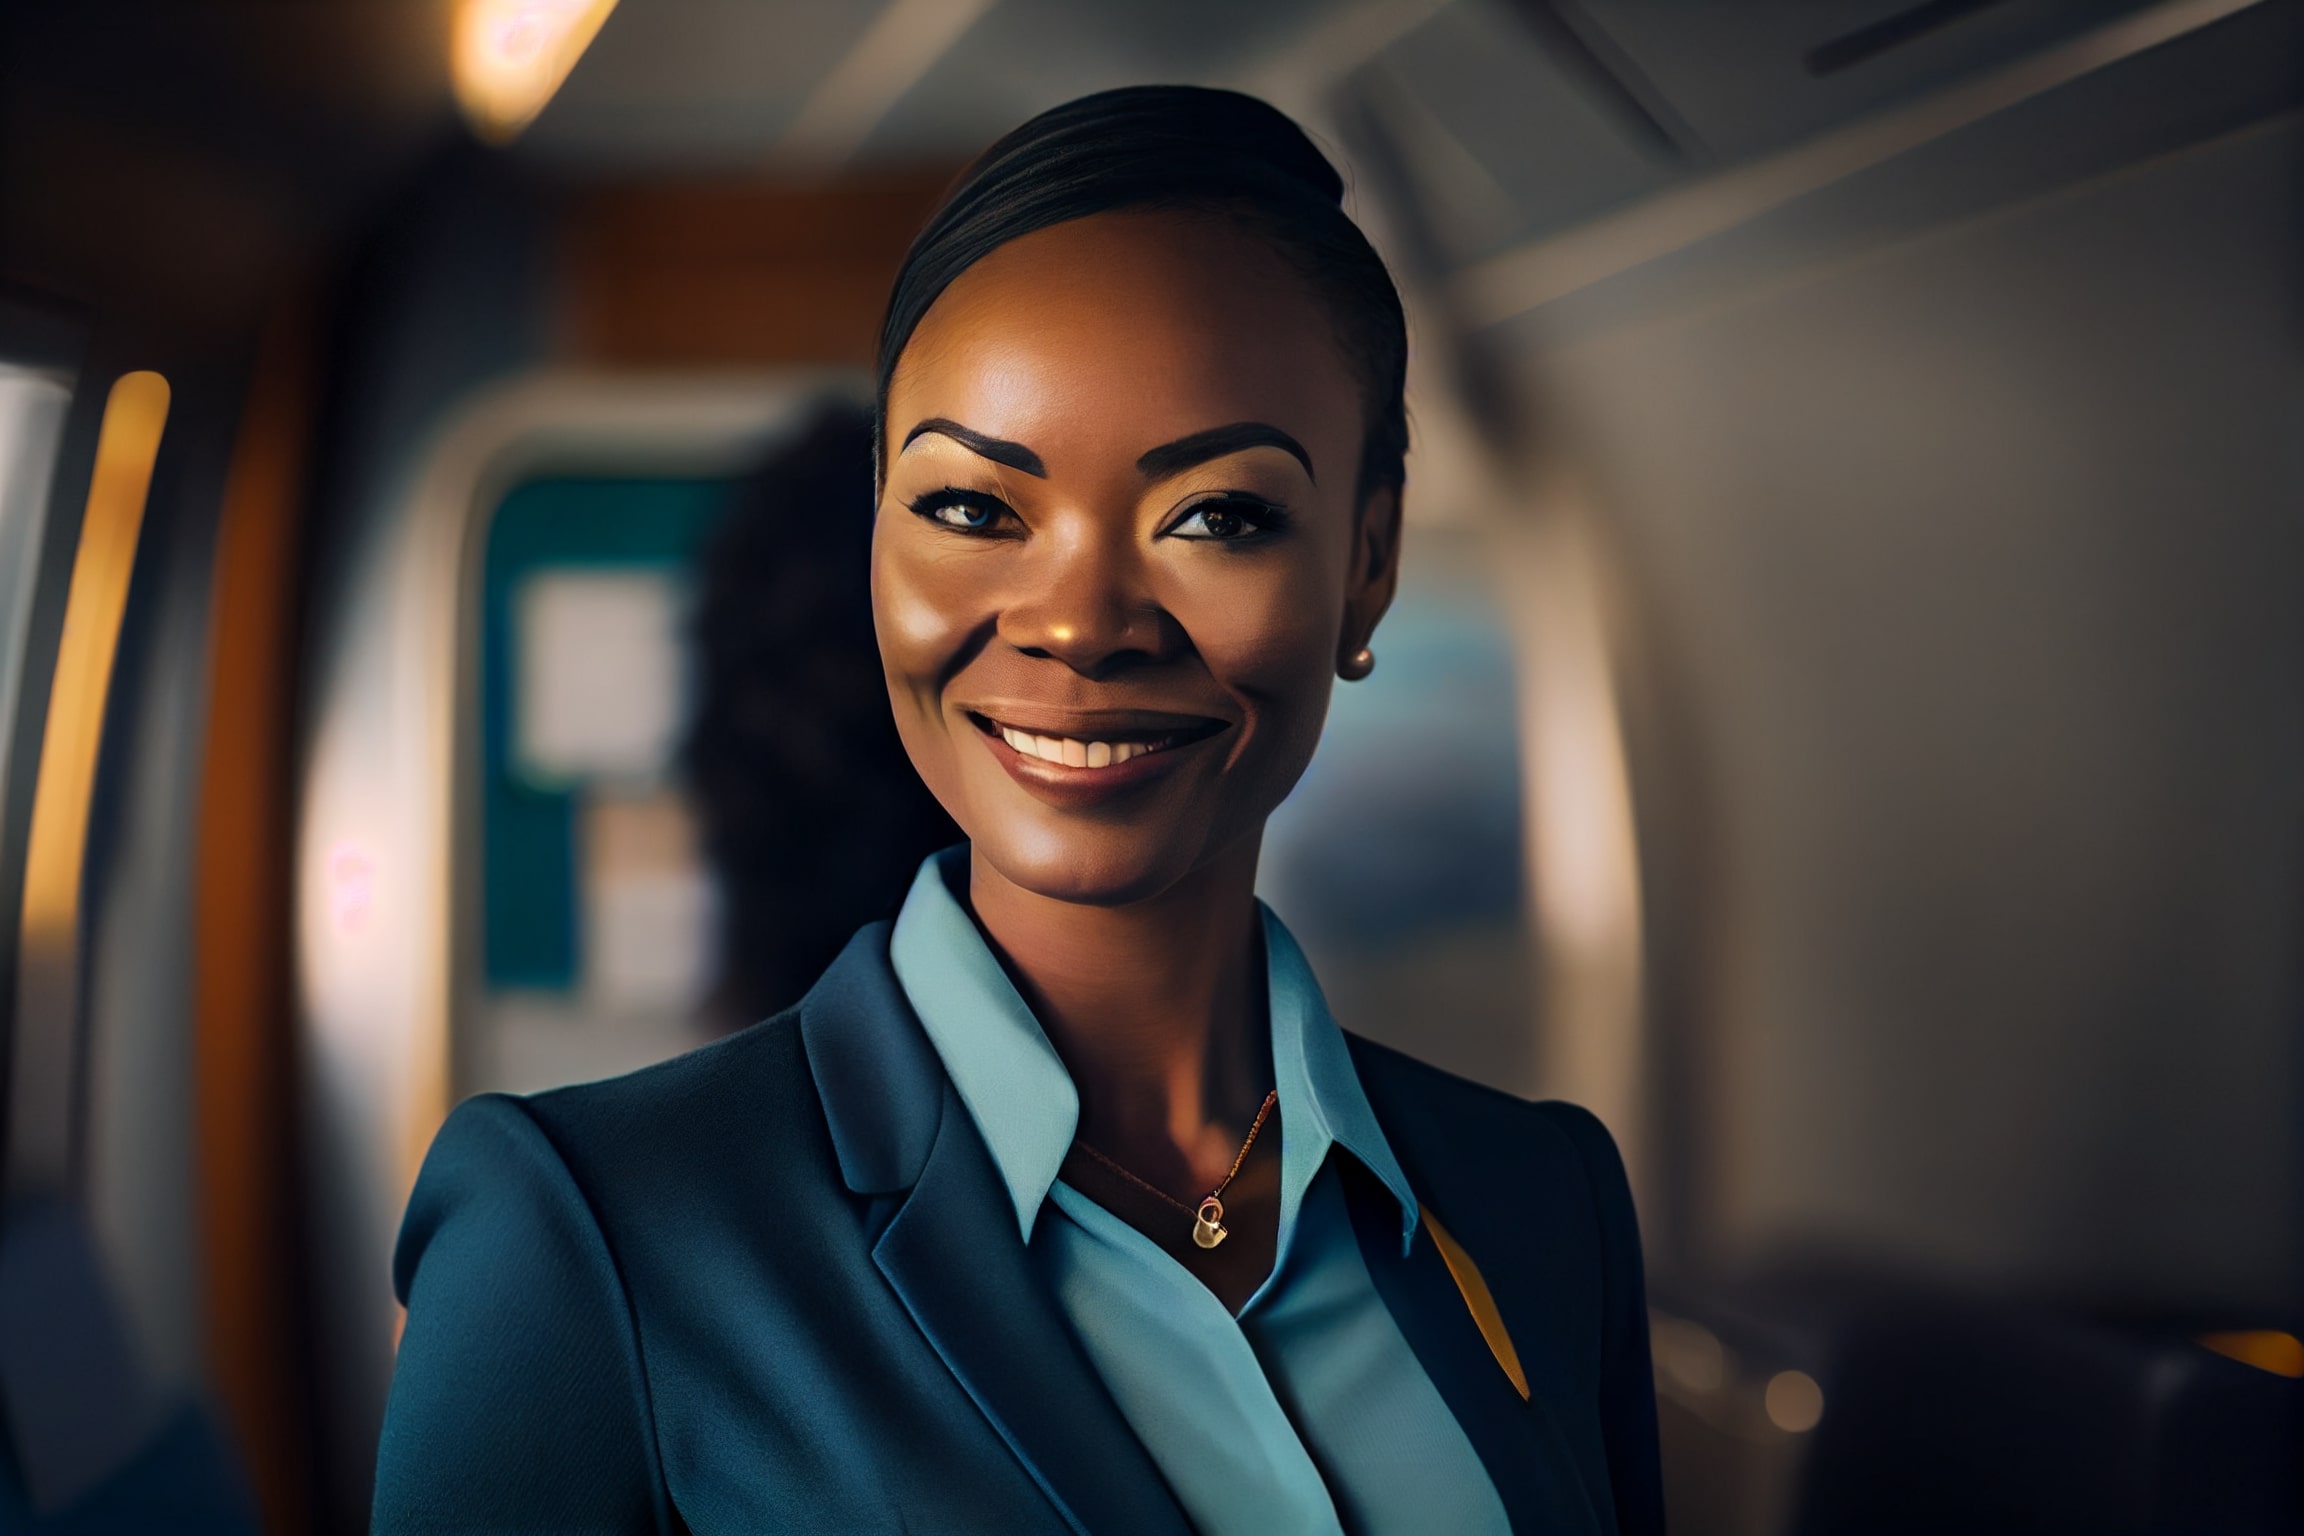 Woman in a business suit is smiling.